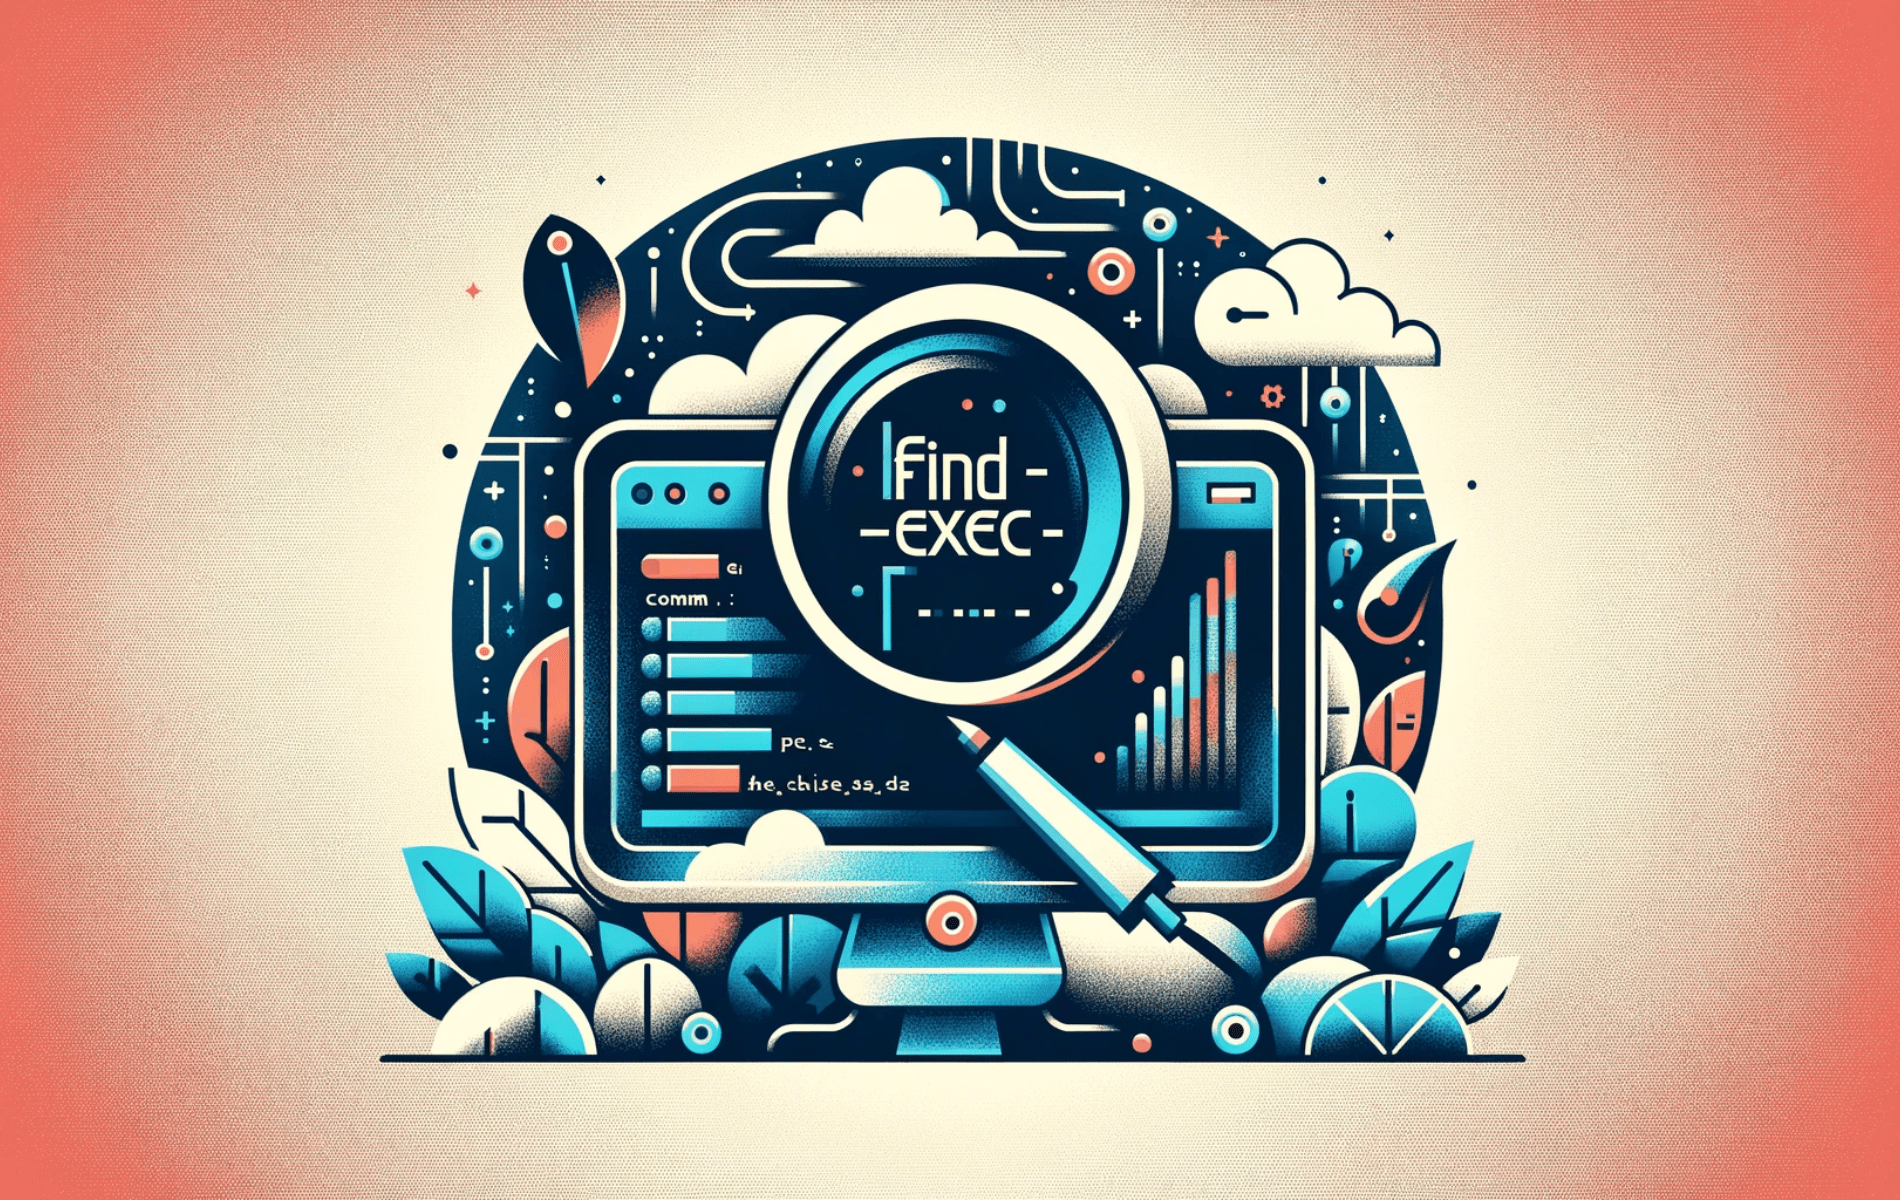 Guide on using find -exec command in Linux